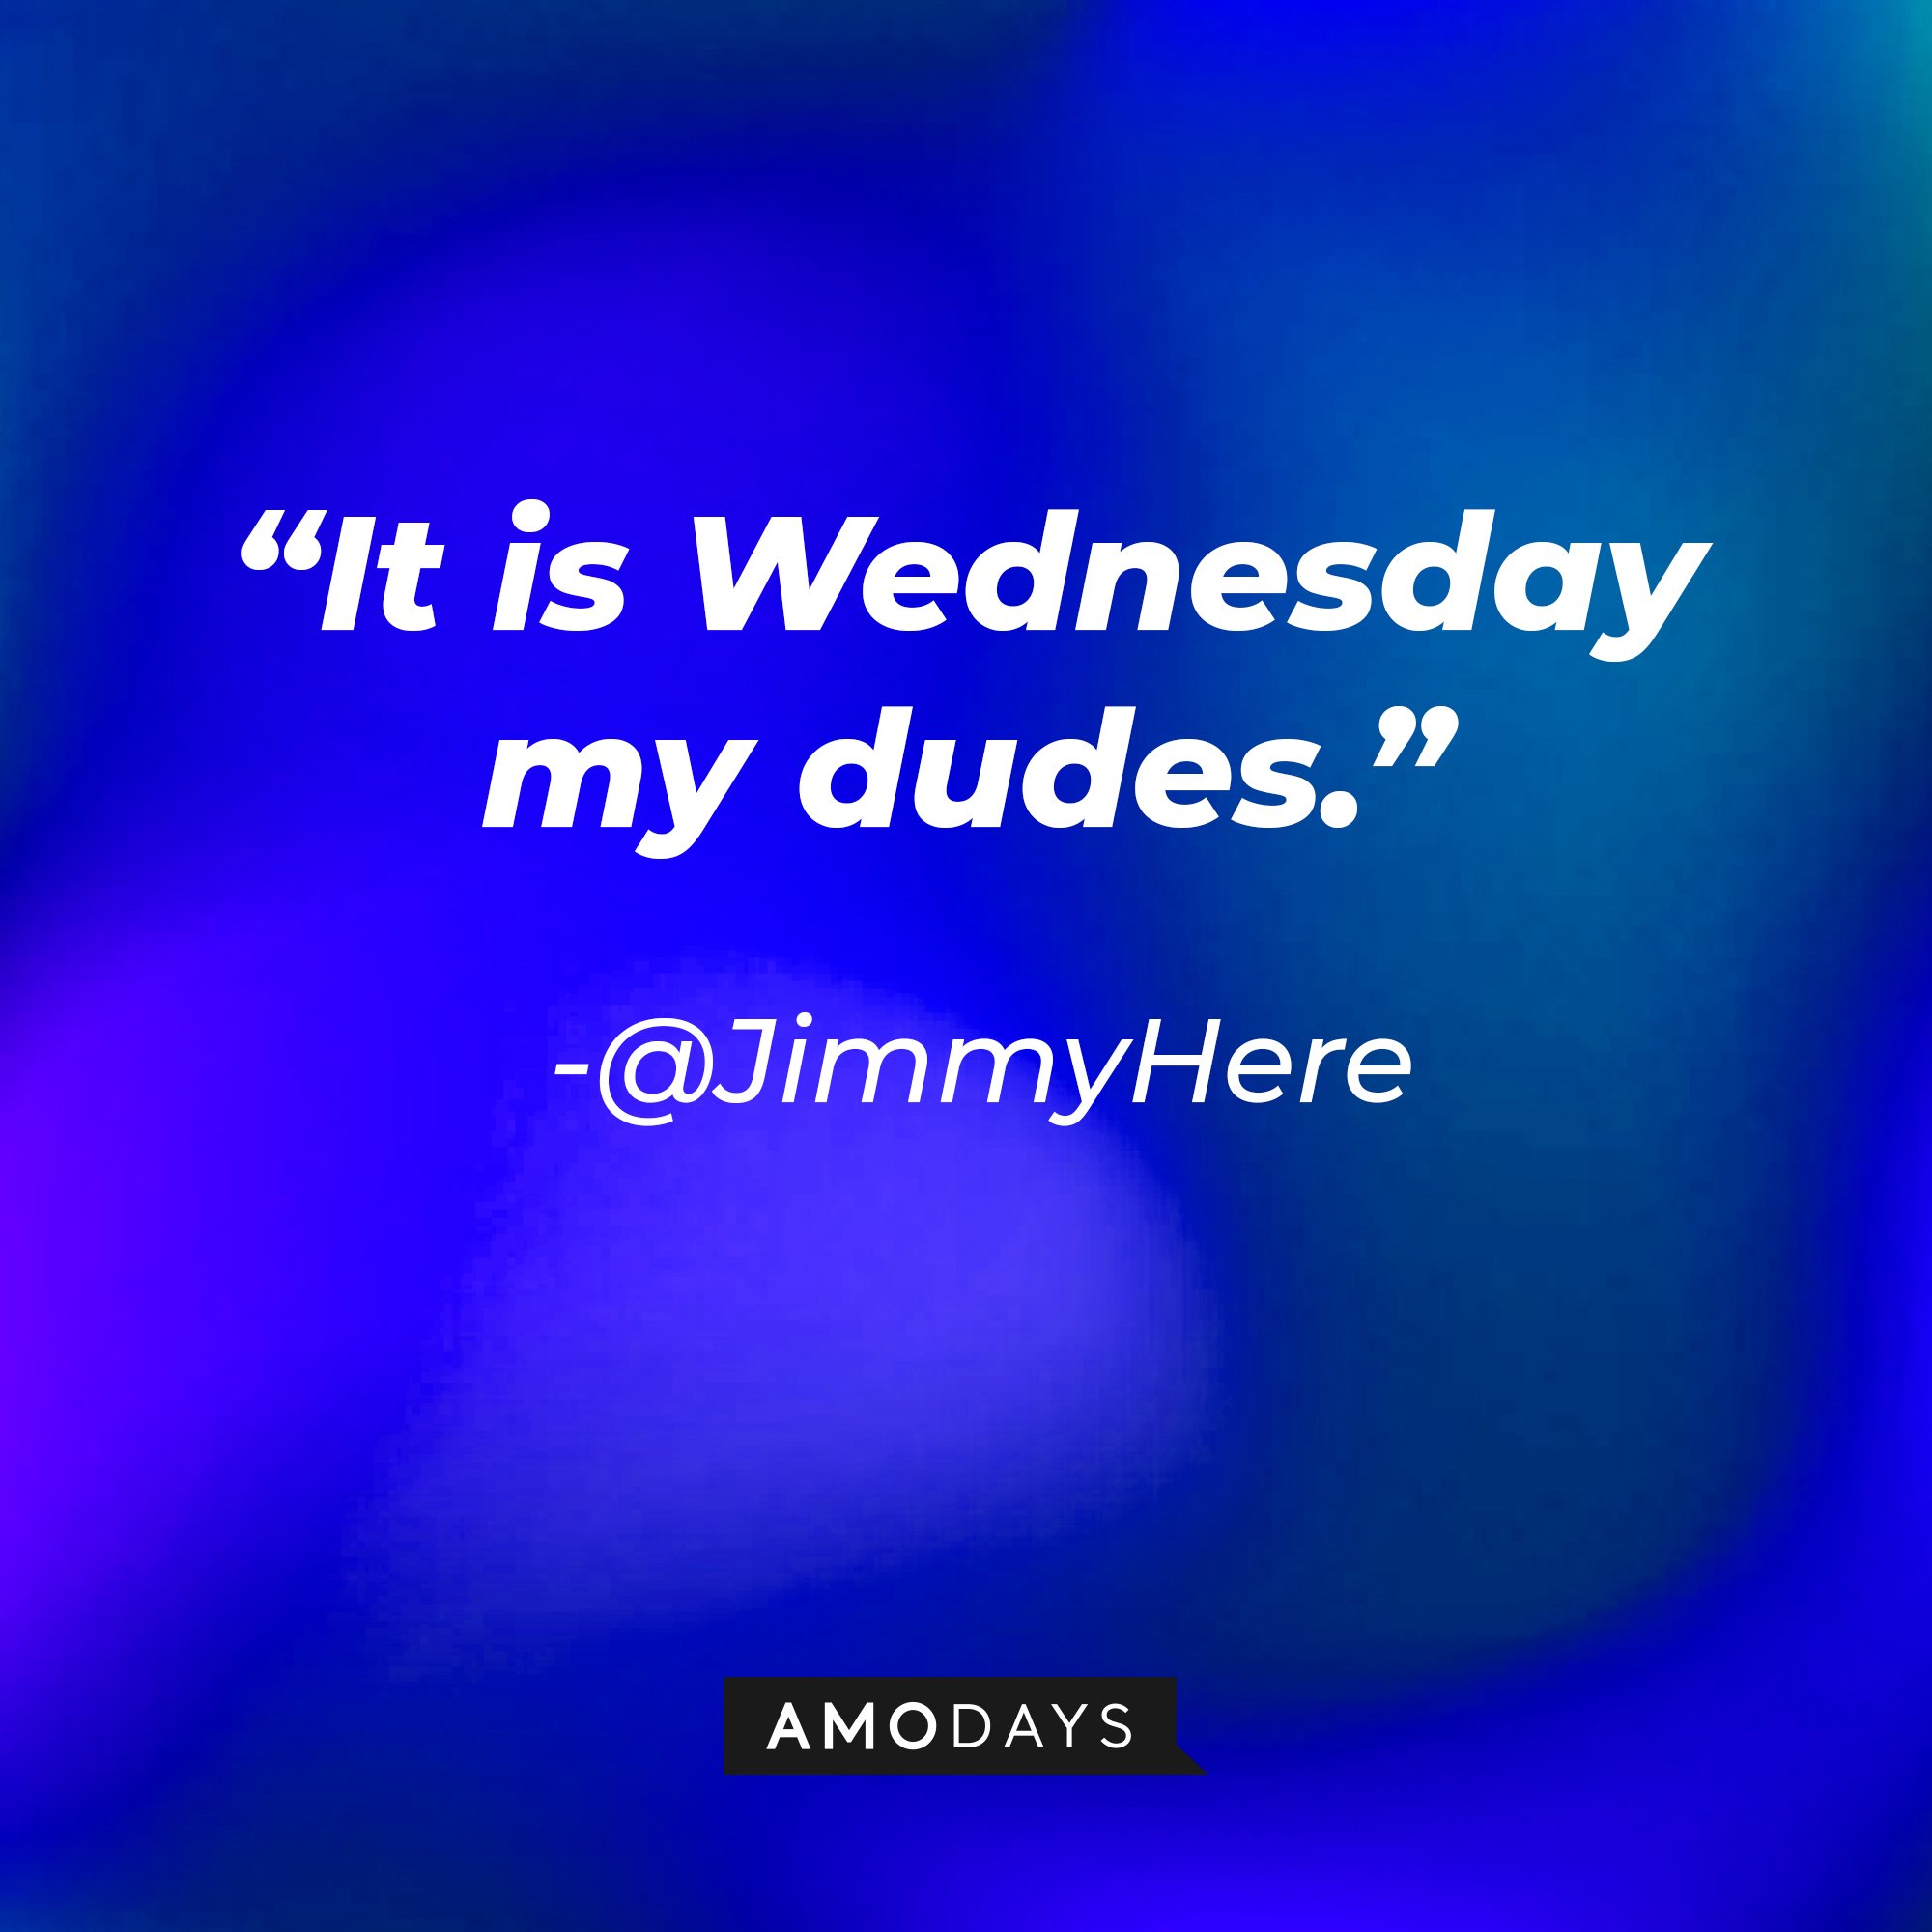 @JimmyHere's quote: “It is Wednesday my dudes.” | Image: AmoDays